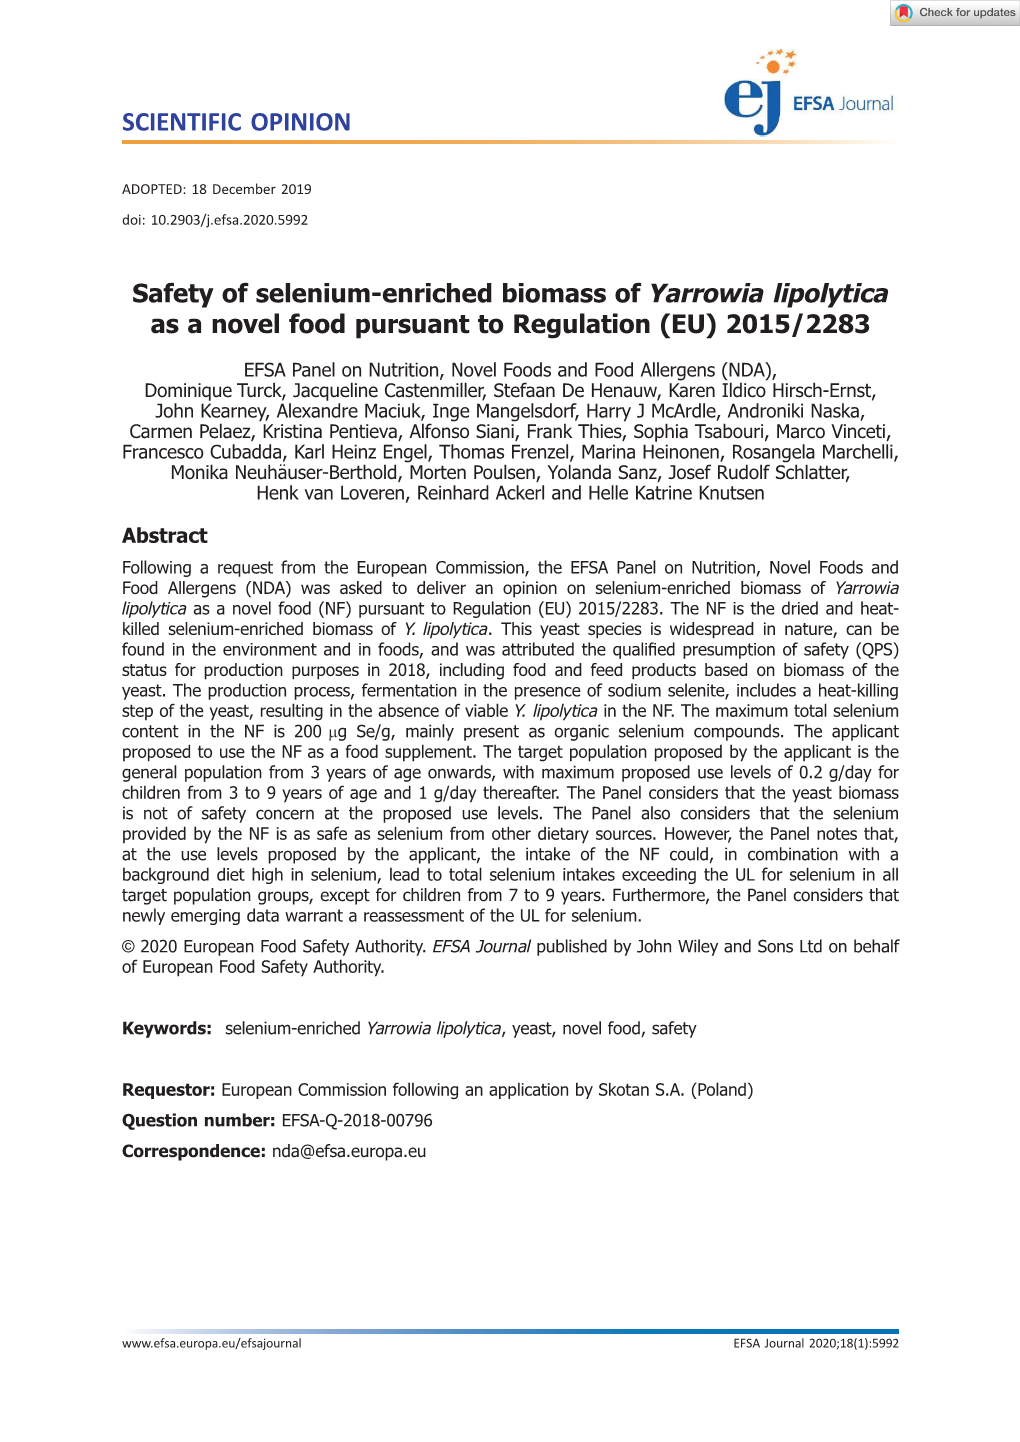 Safety of Selenium‐Enriched Biomass of Yarrowia Lipolytica As a Novel Food Pursuant to Regulation (EU) 2015/2283